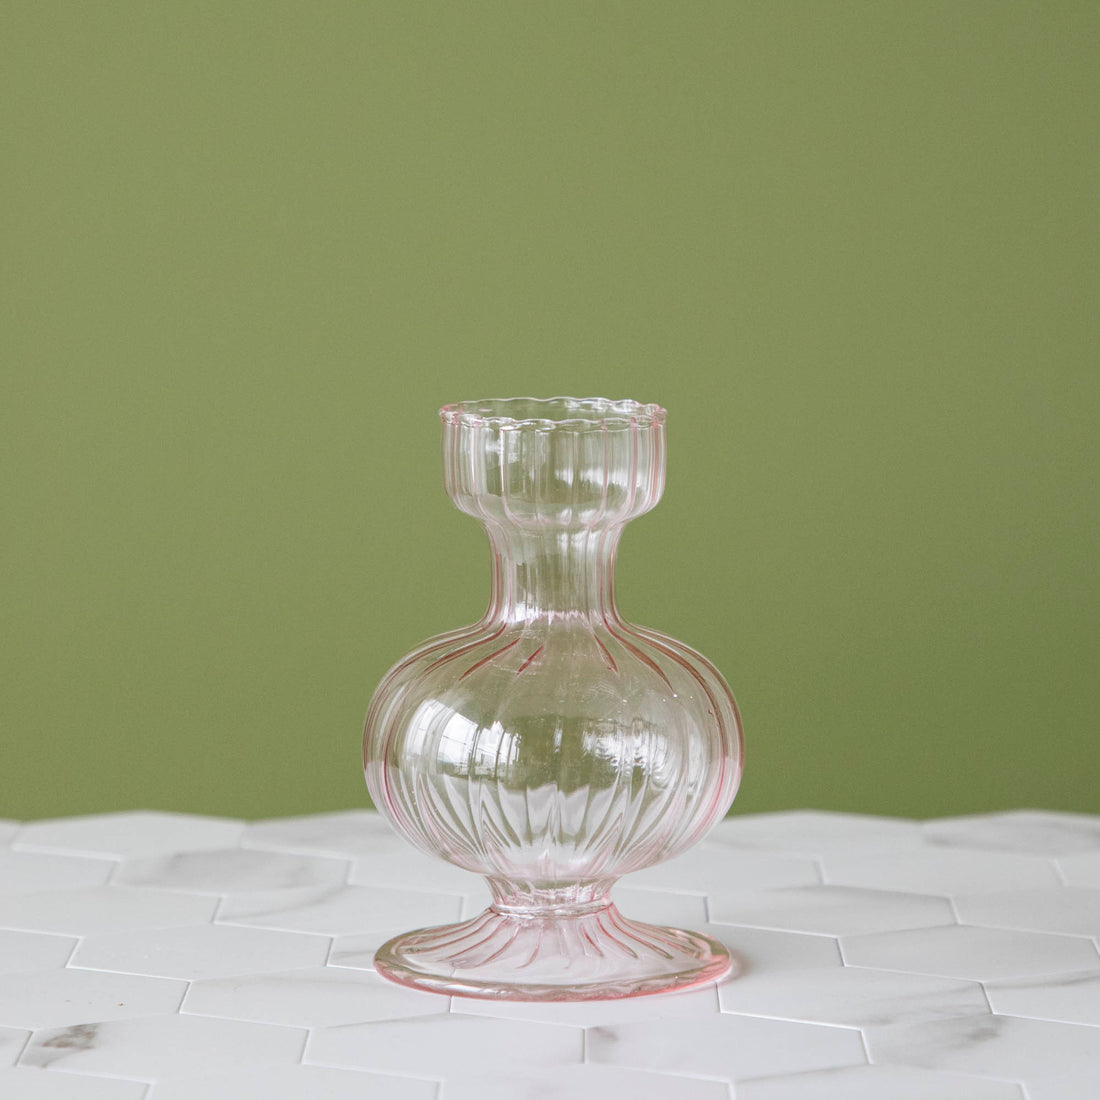 A Pink Vintage Boutique Vase from Accent Decor with a pink glass design sitting on top of a marble table.